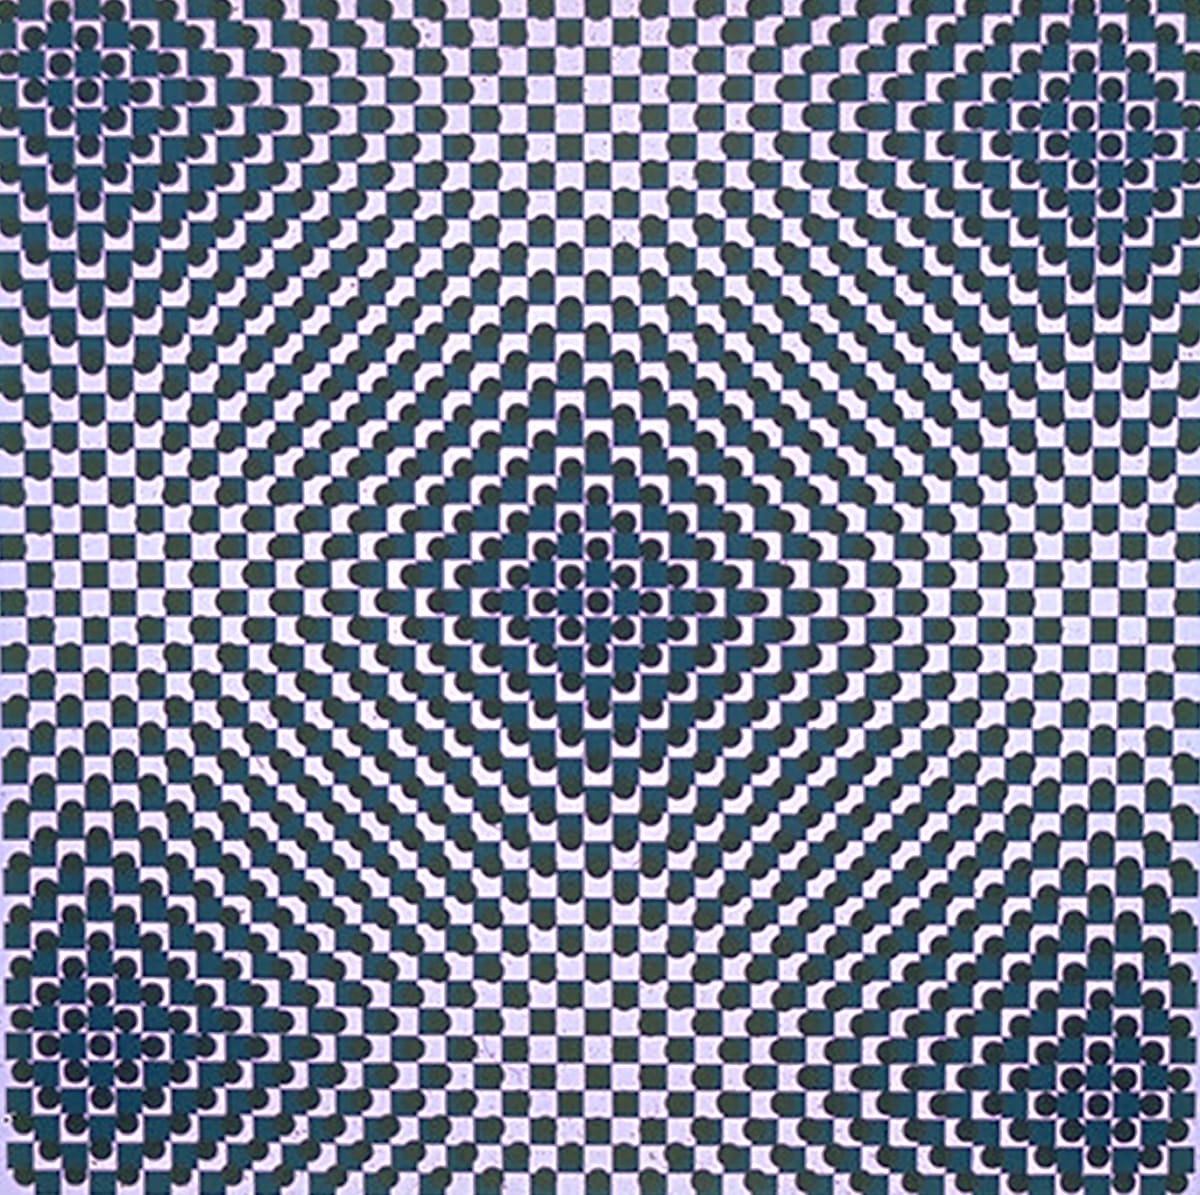 Patterns I SS by Bruce Marsh  Image: This was part of a series. Handcut(!!) stencils, two patterns, one of squares one of circles, each with a slightly different measure. Perhaps one 1/8", the other 5/32". I used the same screens for a variety of color palettes.